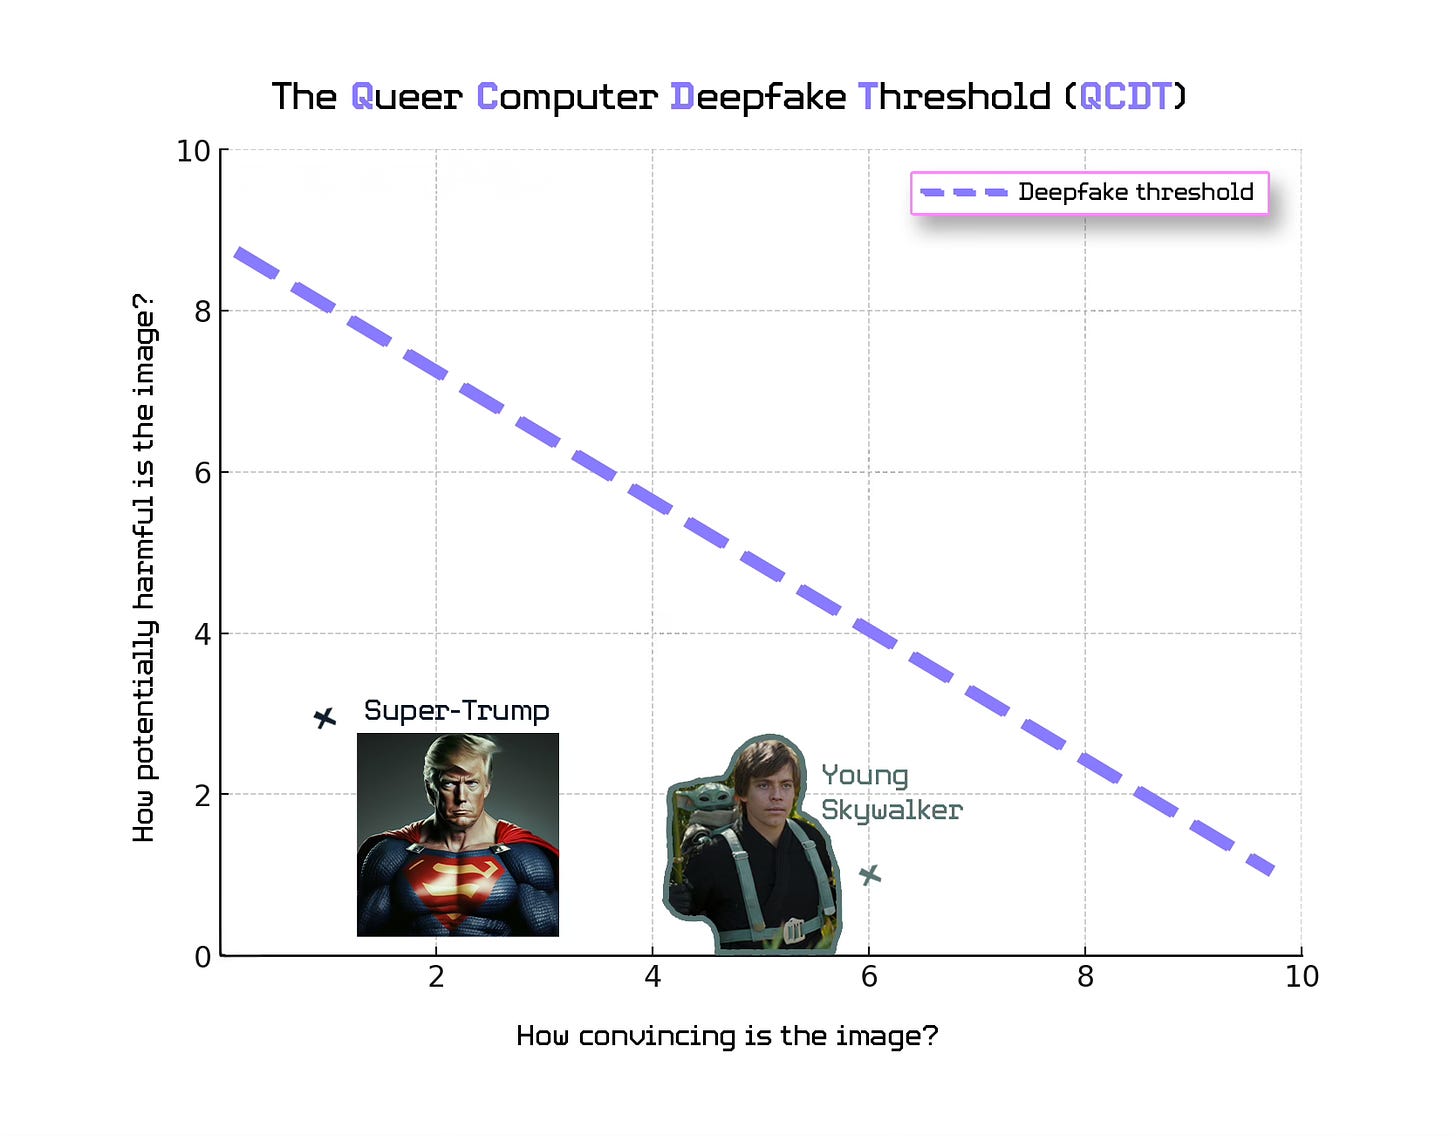 A graph titled 'The Queer Computer Deepfake Threshold (QCDT)' with two axes. The x-axis is labeled 'How convincing is the image?' and ranges from 0 to 10. The y-axis is labeled 'How potentially harmful is the image?' and also ranges from 0 to 10. A dashed line labeled 'Deepfake threshold' diagonally descends from the upper left to lower right, suggesting a correlation between an image's convincingness and its potential harm. Two points are marked with icons below the line: 'Super-Trump,' depicting a figure resembling Superman with Donald Trump's face, is closer to the origin, indicating low harm and low convincingness. 'Young Skywalker,' depicting a young Luke Skywalker, is further along the x-axis, indicating higher convincingness. Both images are below the 'Deepfake threshold' line, suggesting they are not considered harmful deepfakes according to this model.